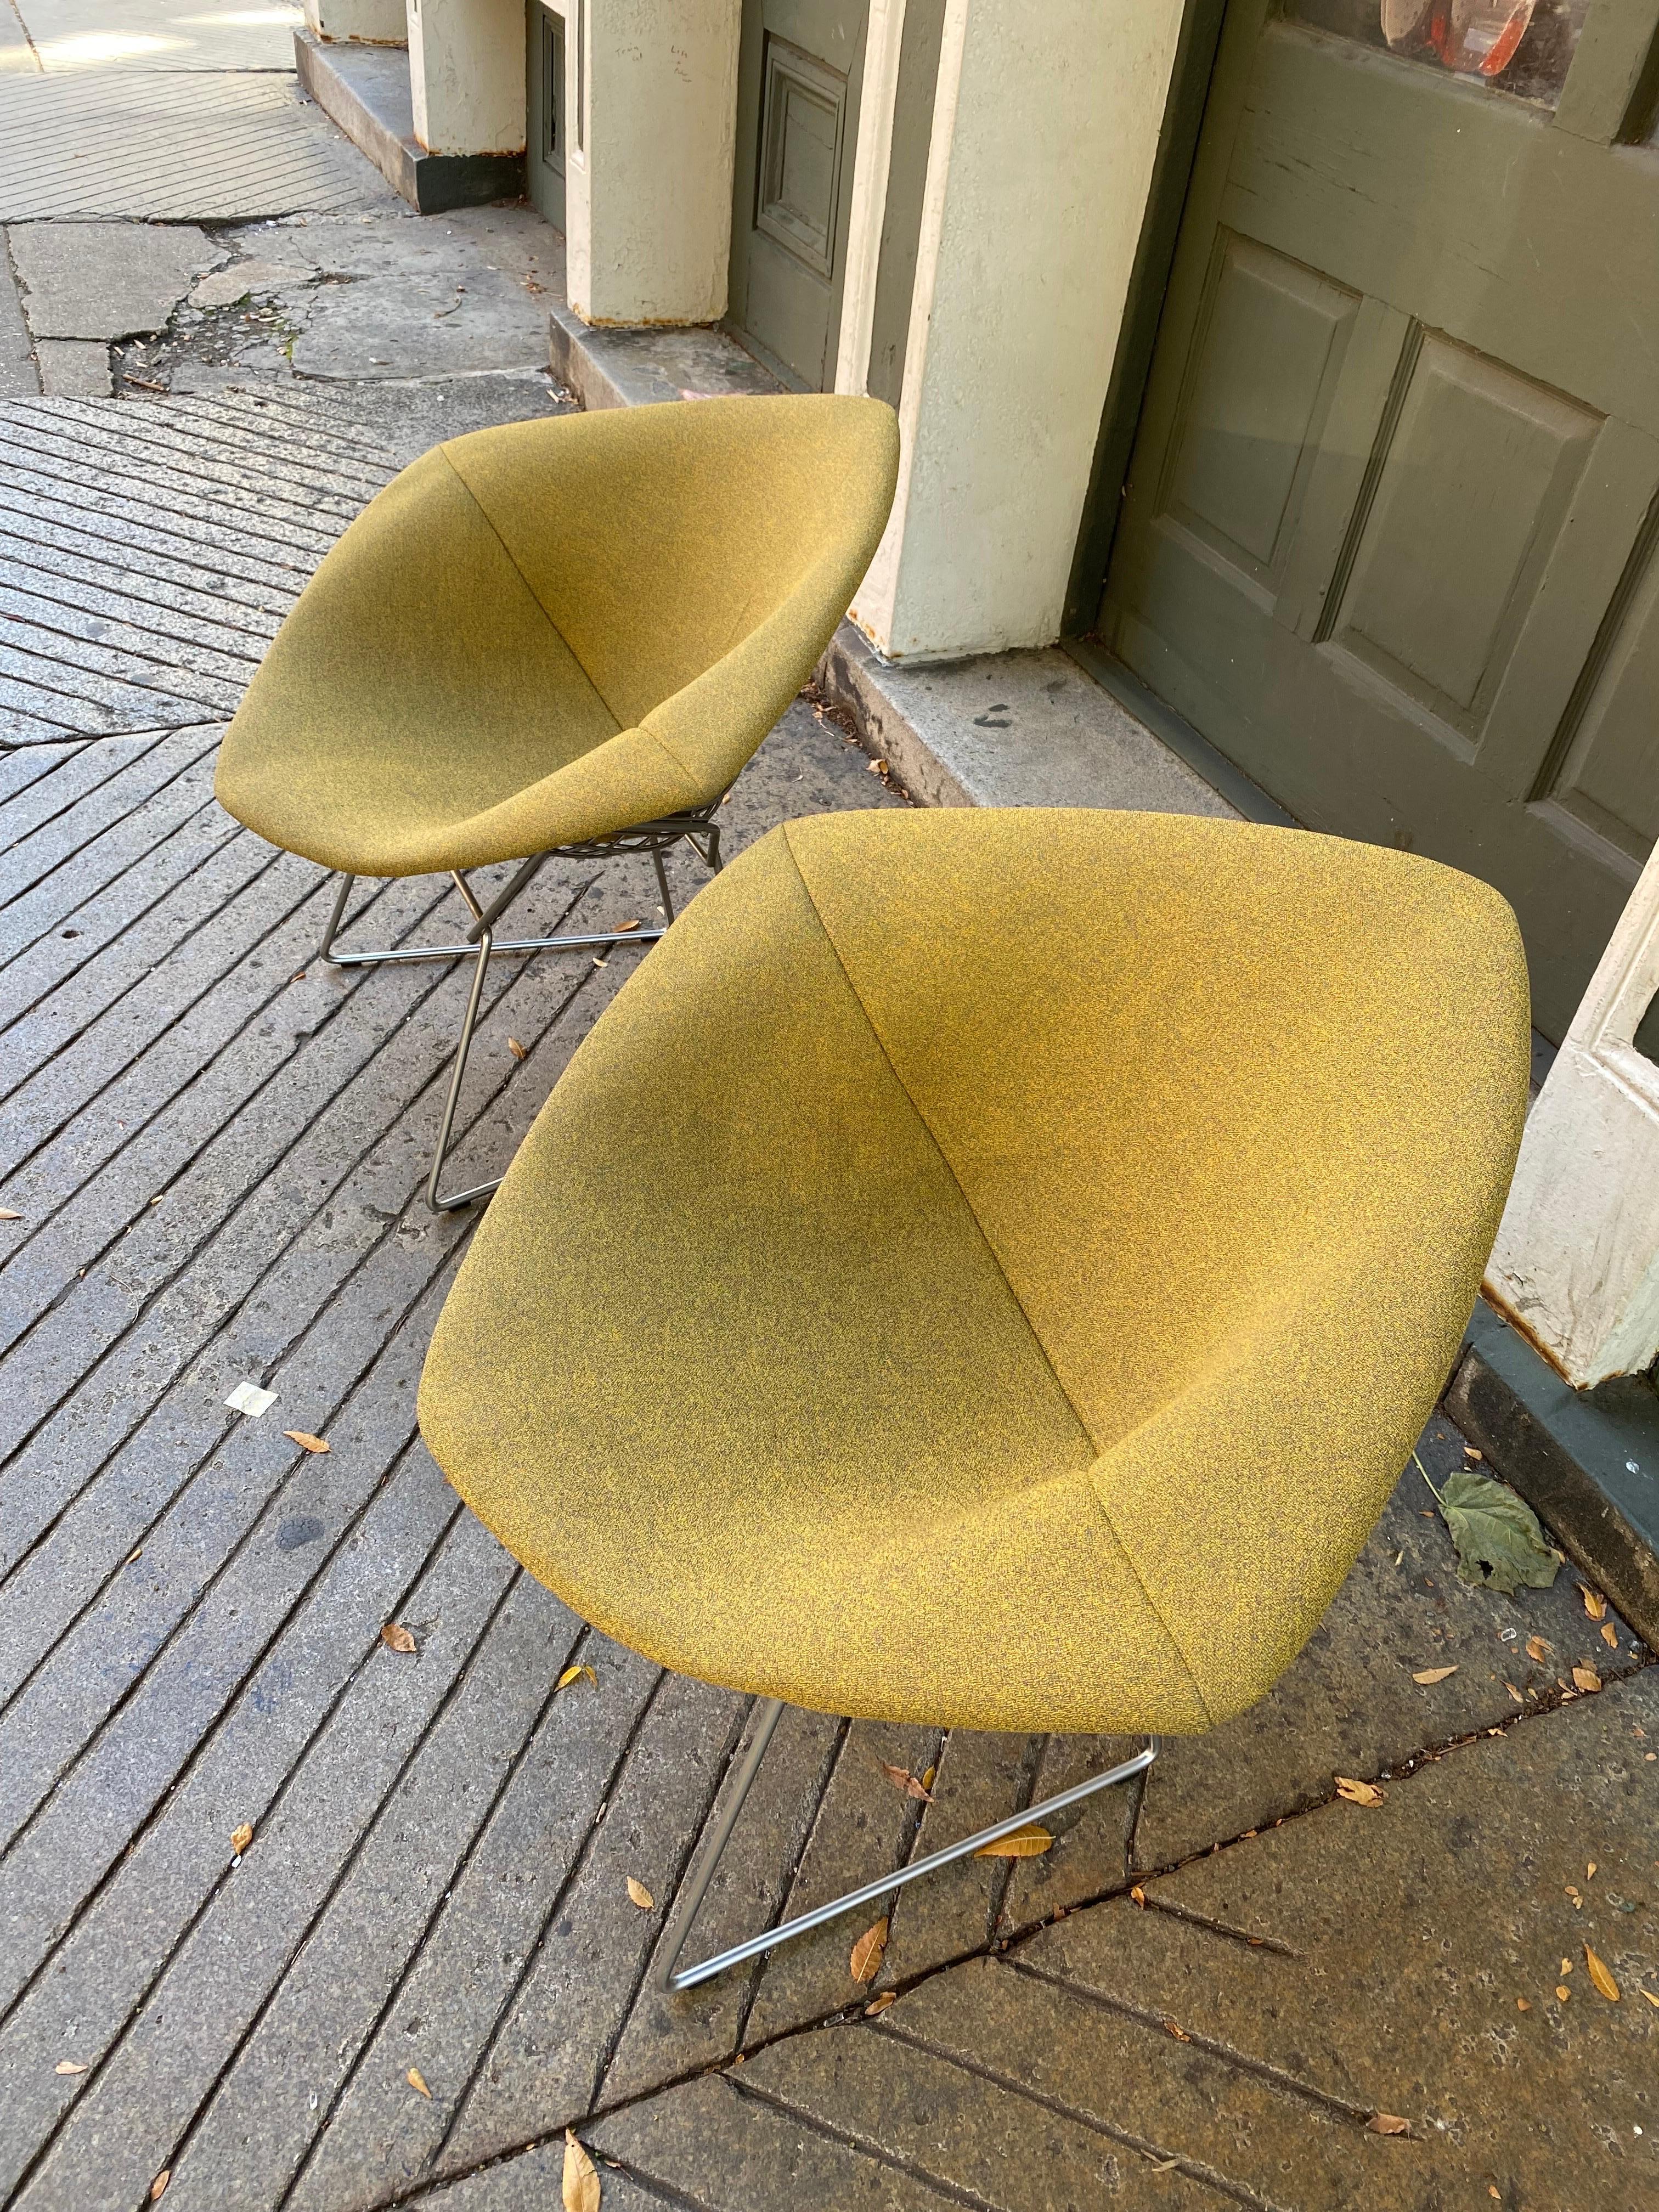 Pair of Bertoia for Knoll small diamond chairs. Newly cleaned covers look very good! Chairs are in a Satin Chrome finish. In very good shape, they have been in storage for a few years, originally from a designer showroom in Philadelphia. Color is a